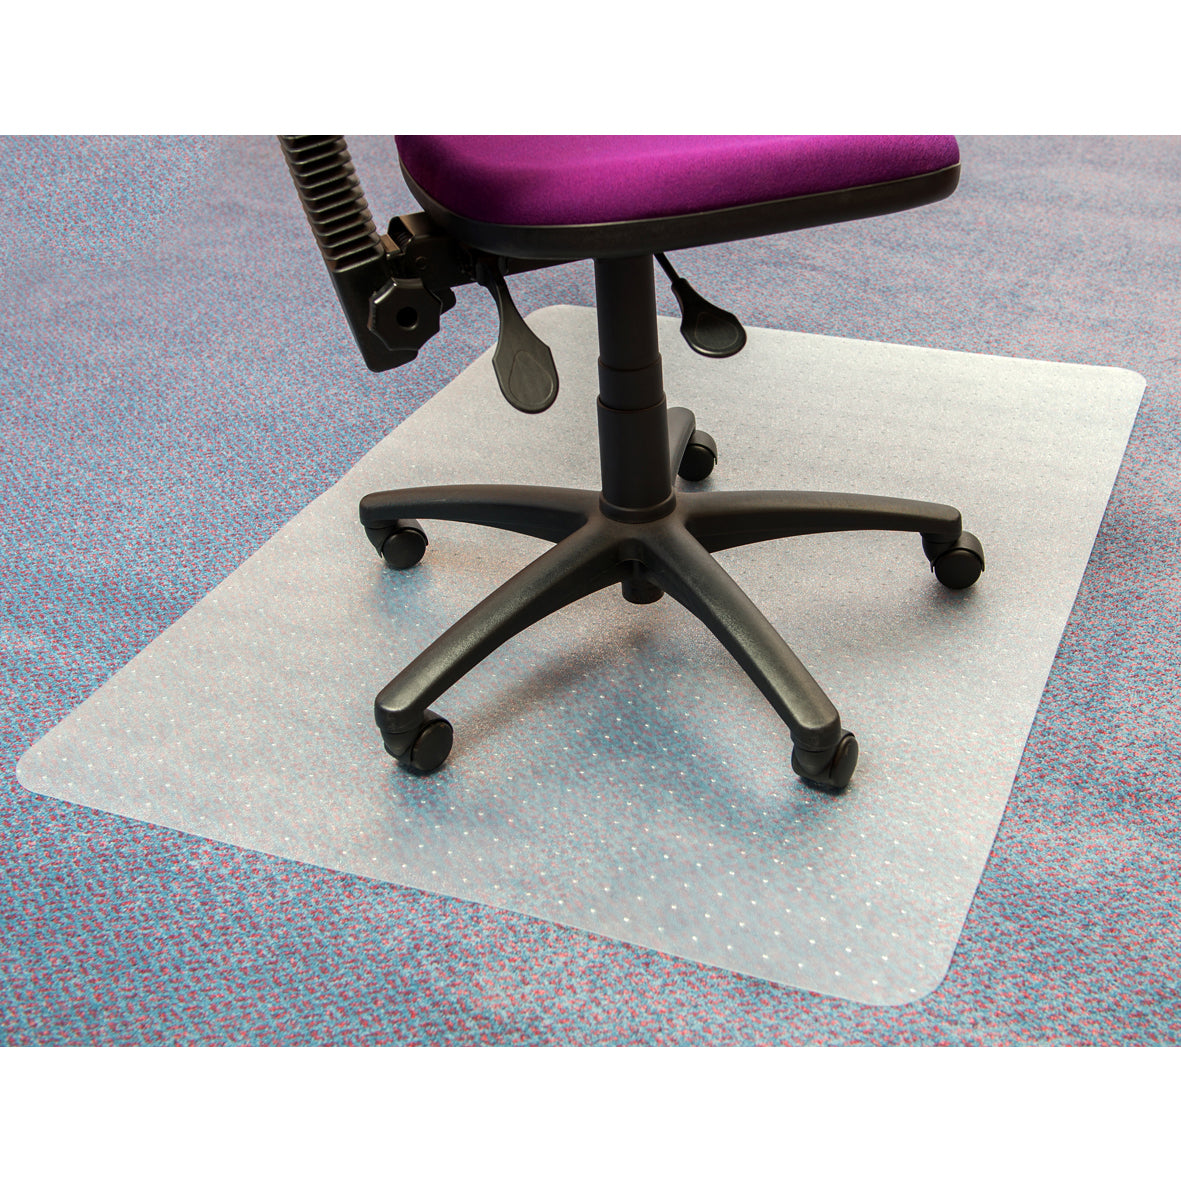 A clear PVC chair mat measuring 90x120cm lies on a multicolored low pile carpet, with a dark purple office chair positioned on top, designed to facilitate smooth chair movement and protect the carpet underneath.